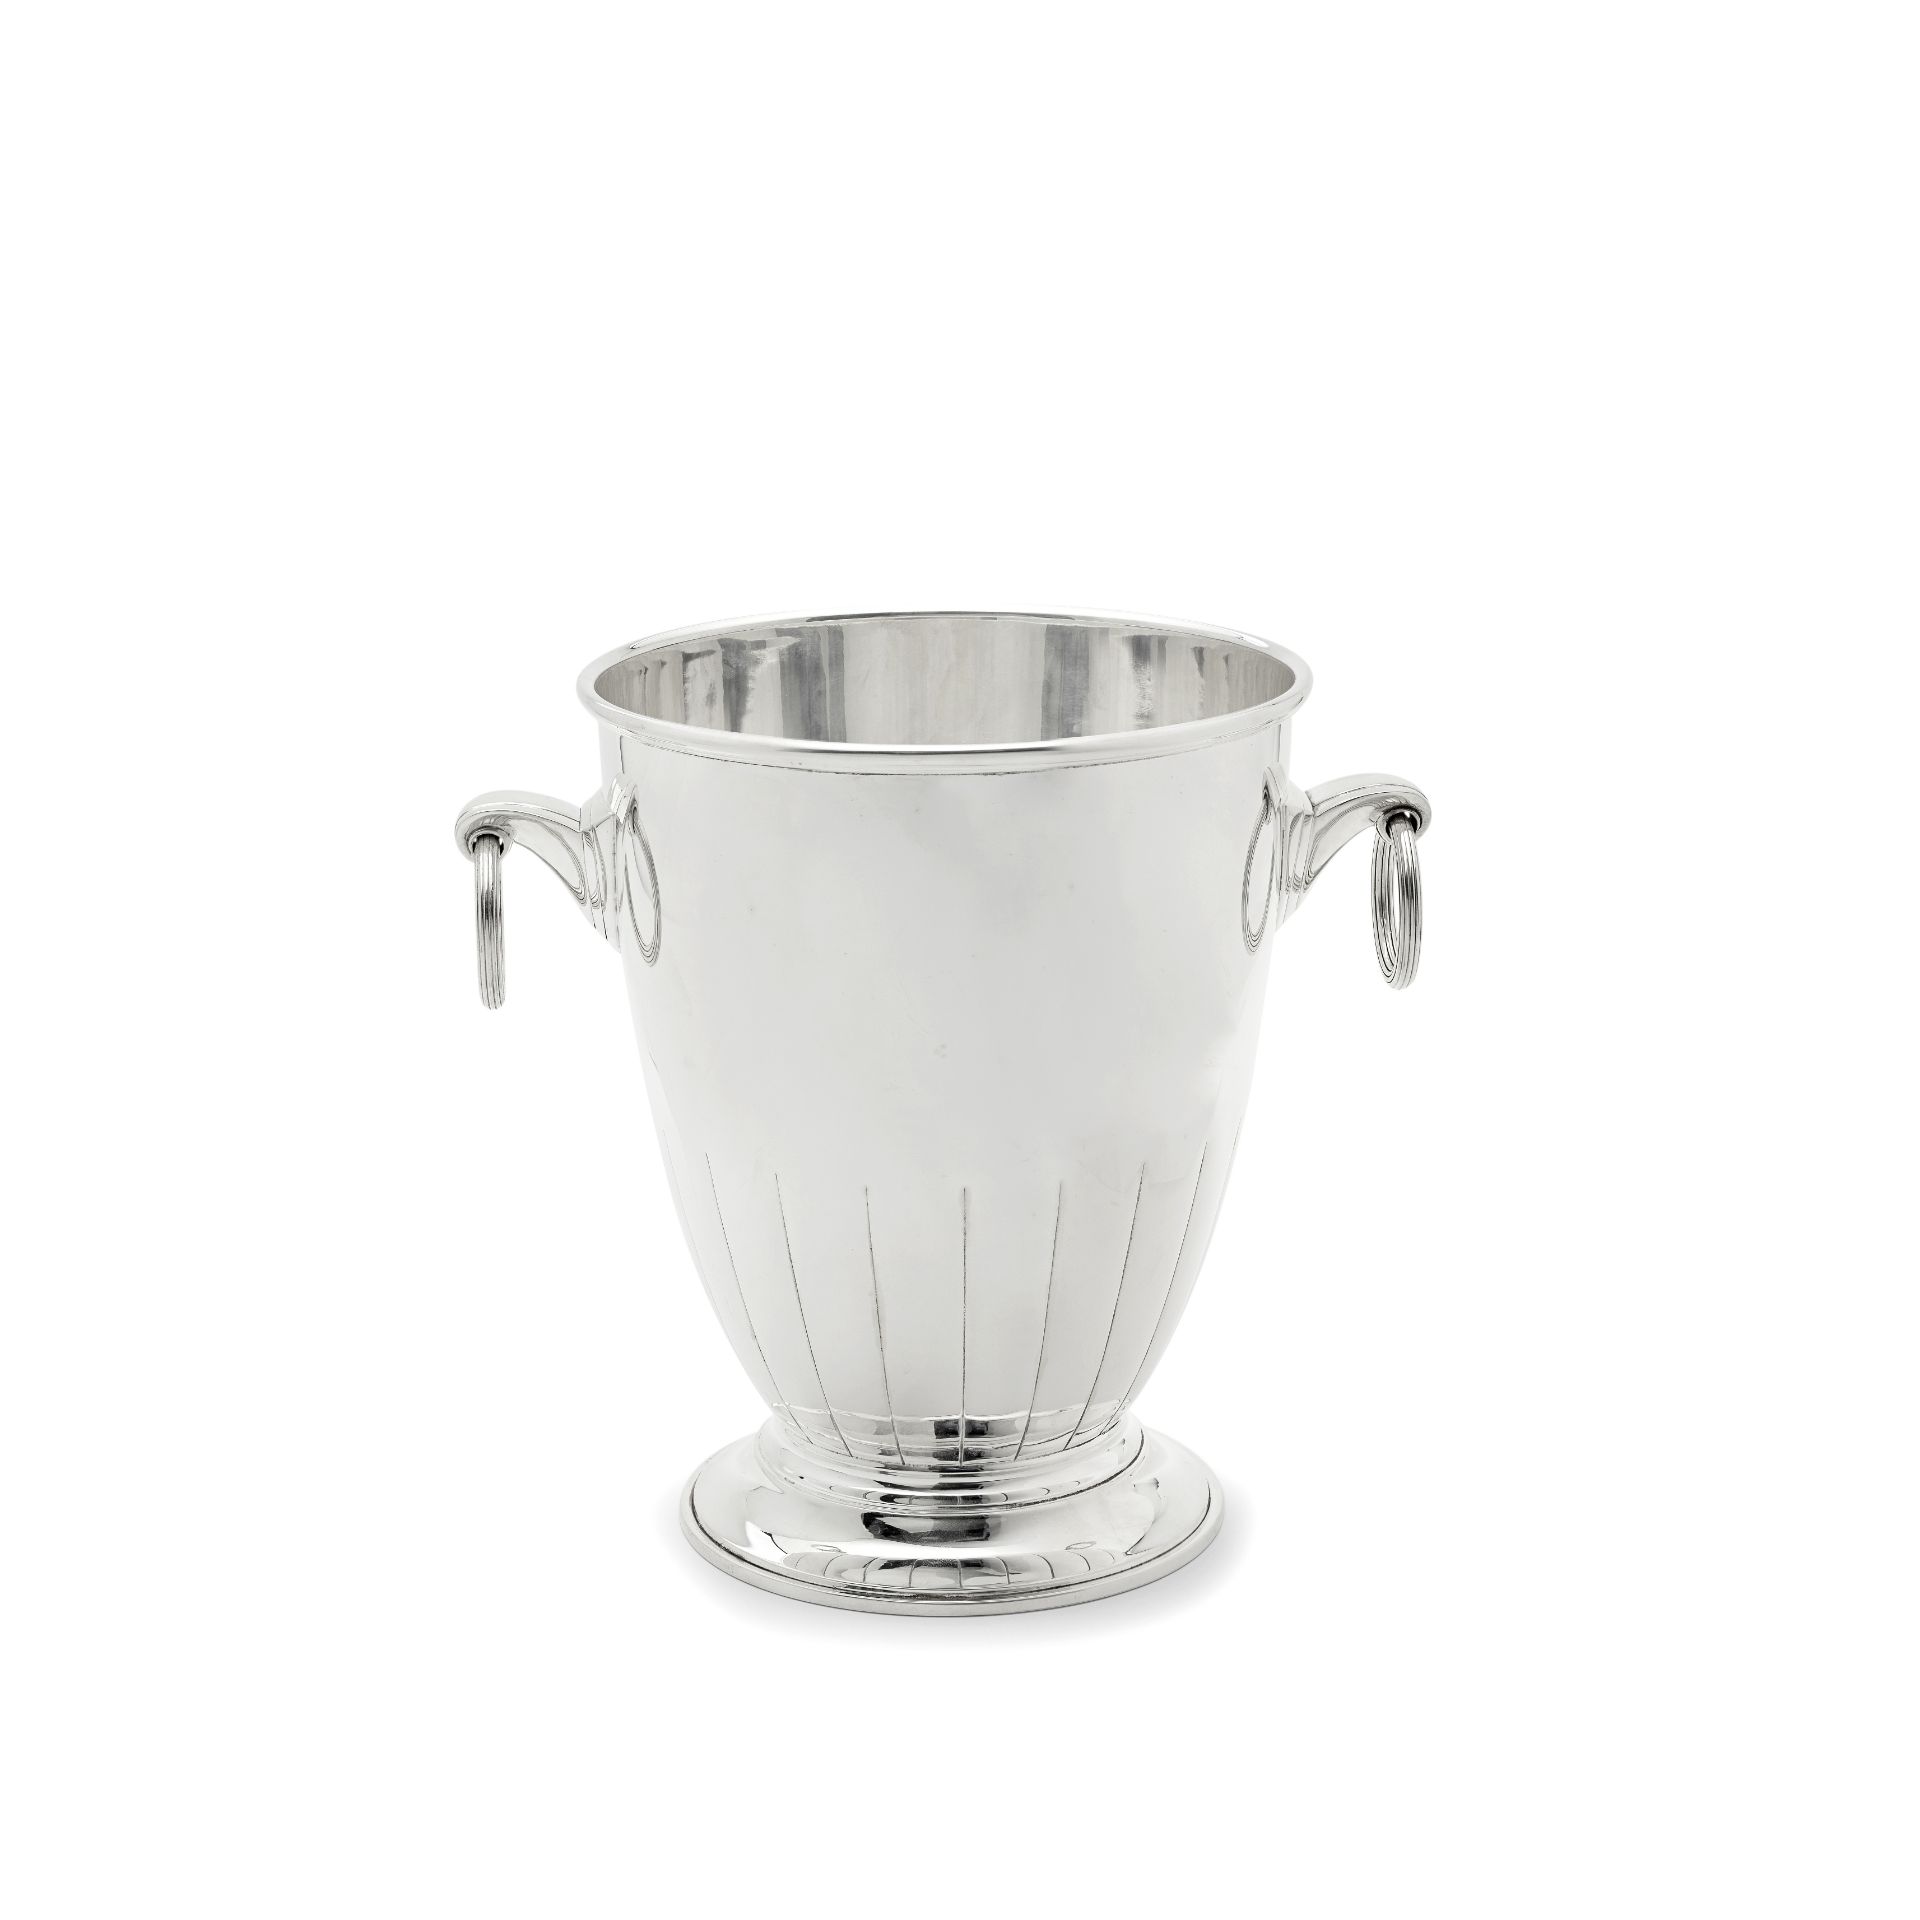 A large silver two-handled ice / champagne bucket Asprey, London 2004